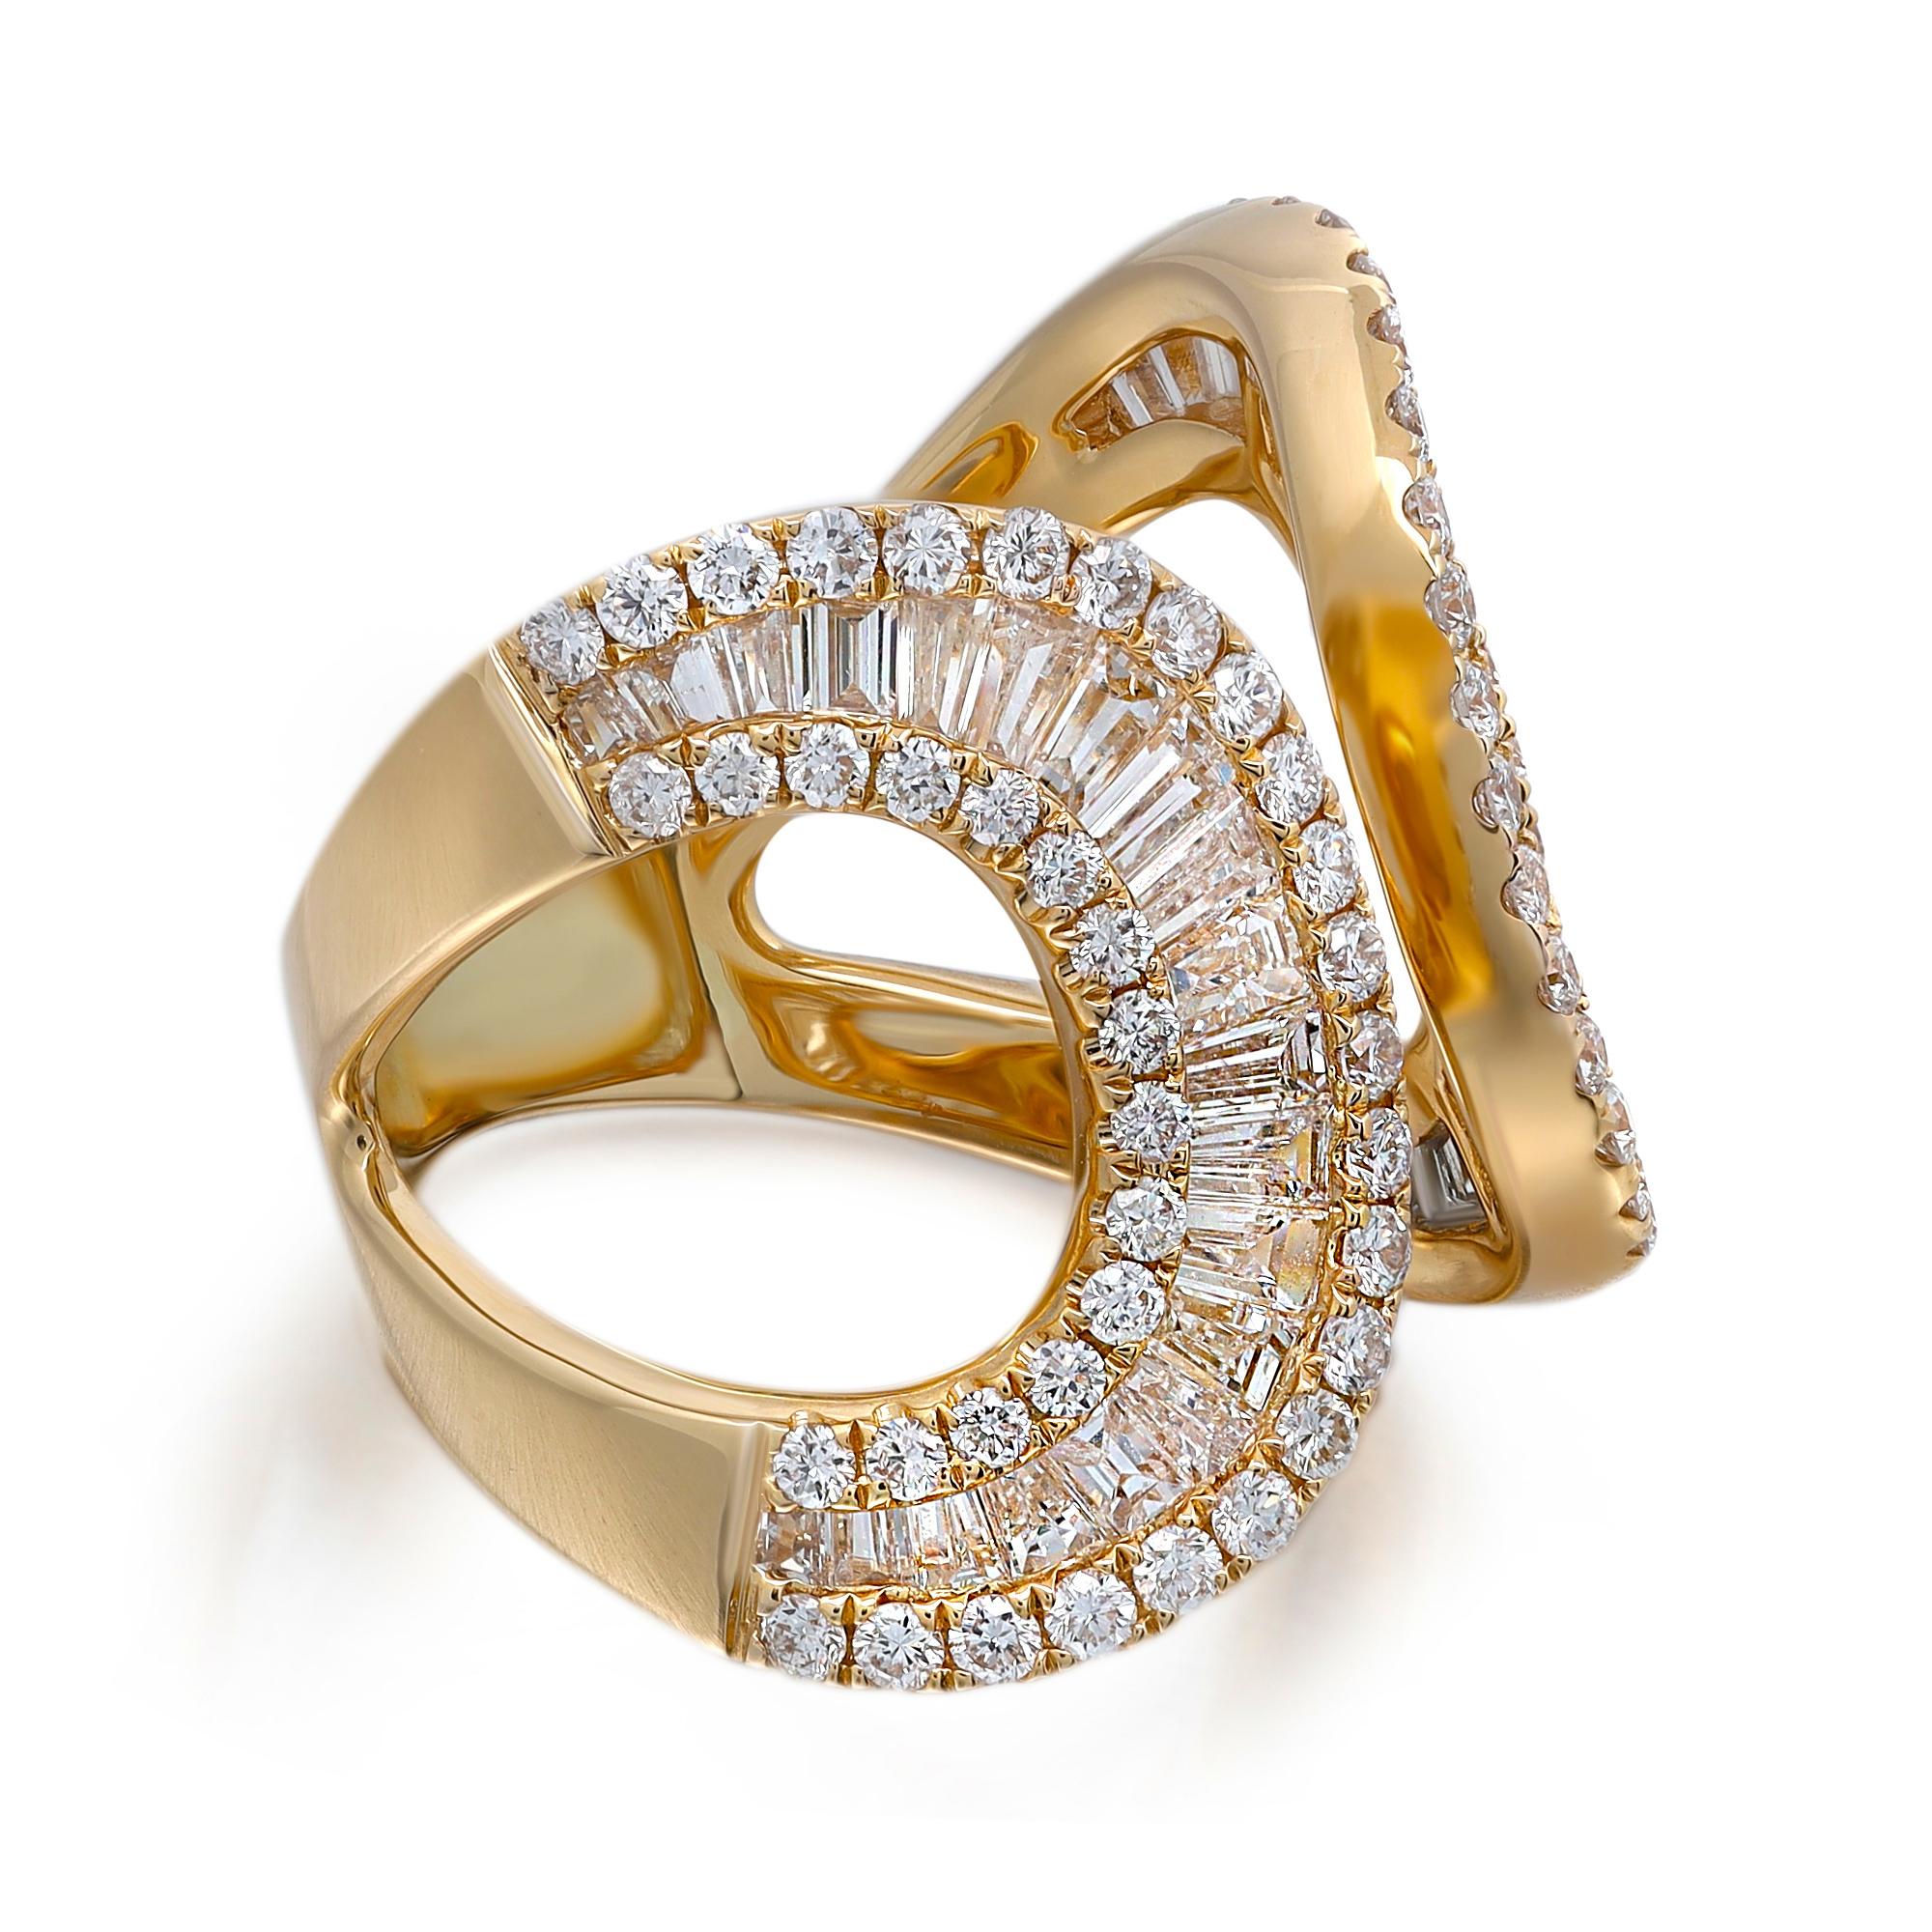 Chic and stylish diamond statement ring. It features channel set baguette cut and round brilliant cut diamonds perfectly encrusted in a high lustrous wide open band ring. Total diamond weight: 2.61 carats. Diamond quality: G-H color and VS-SI